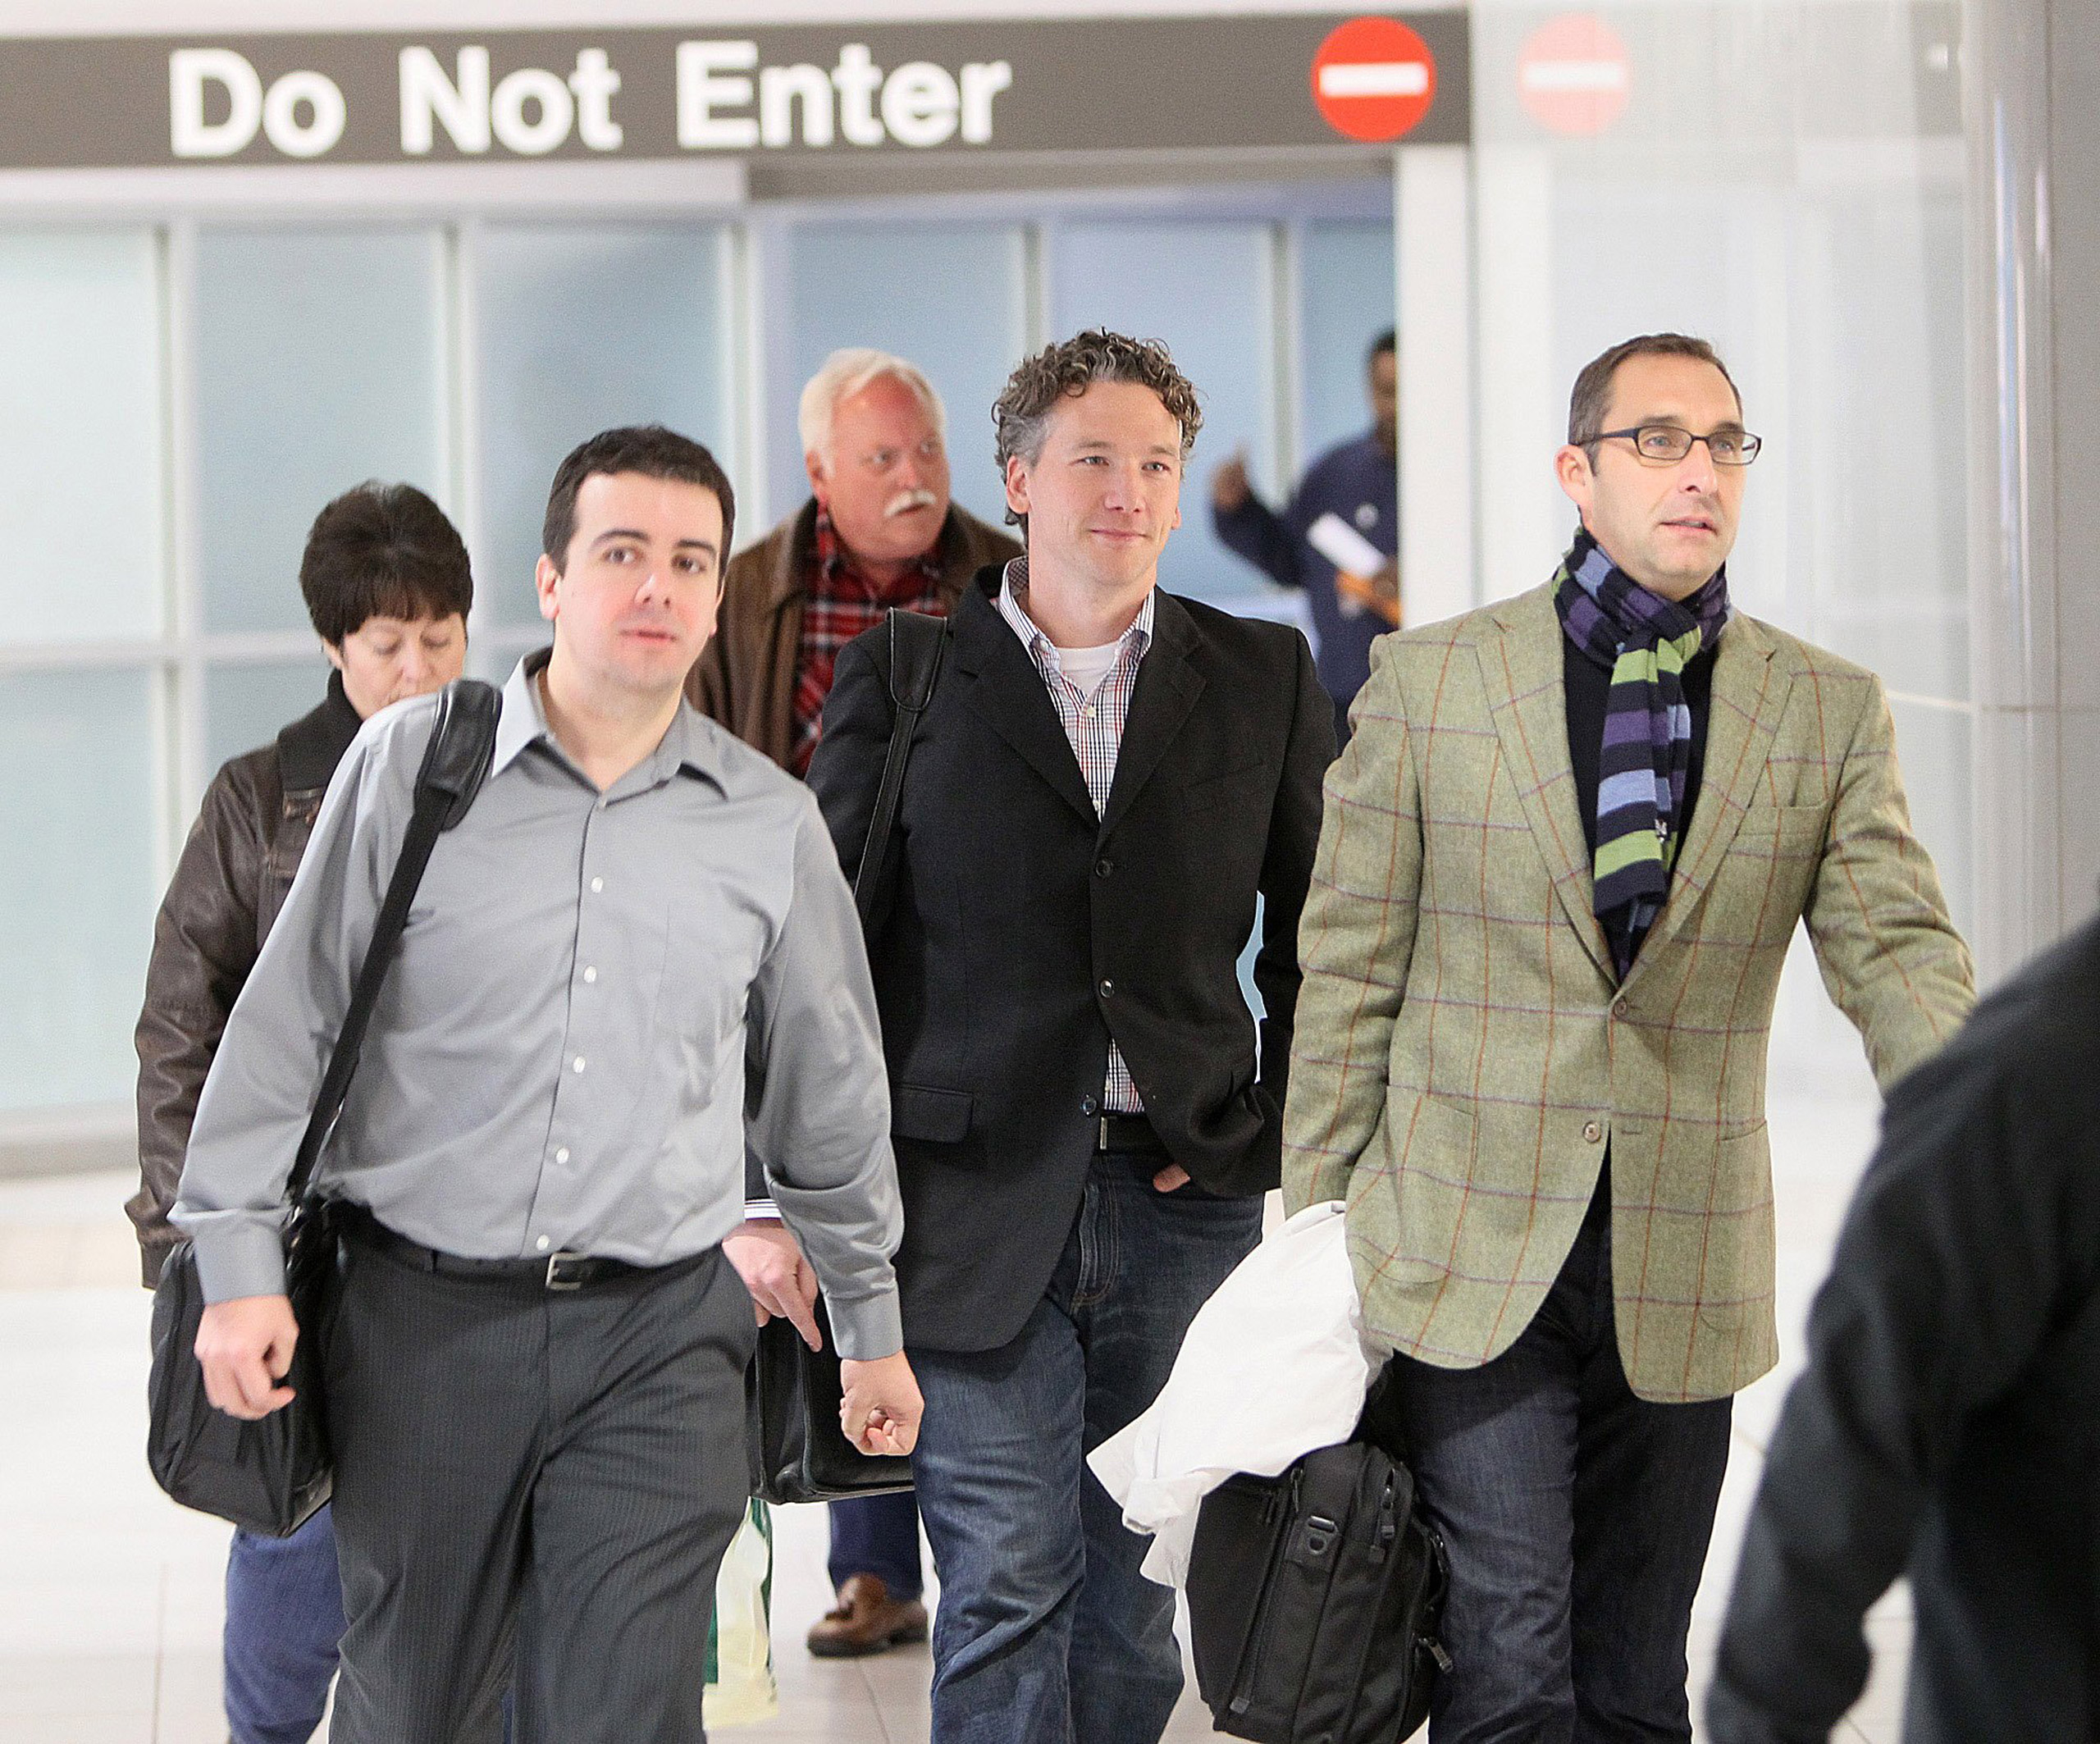 Then-St. Louis Cardinals scouting director Christopher Correa (left), assistant general manager Mike Girsch and general manager John Mozeliak arrive at Lambert-St. Louis International Airport in St. Louis, Mo., on Dec. 8, 2011. (Chris Lee—AP)